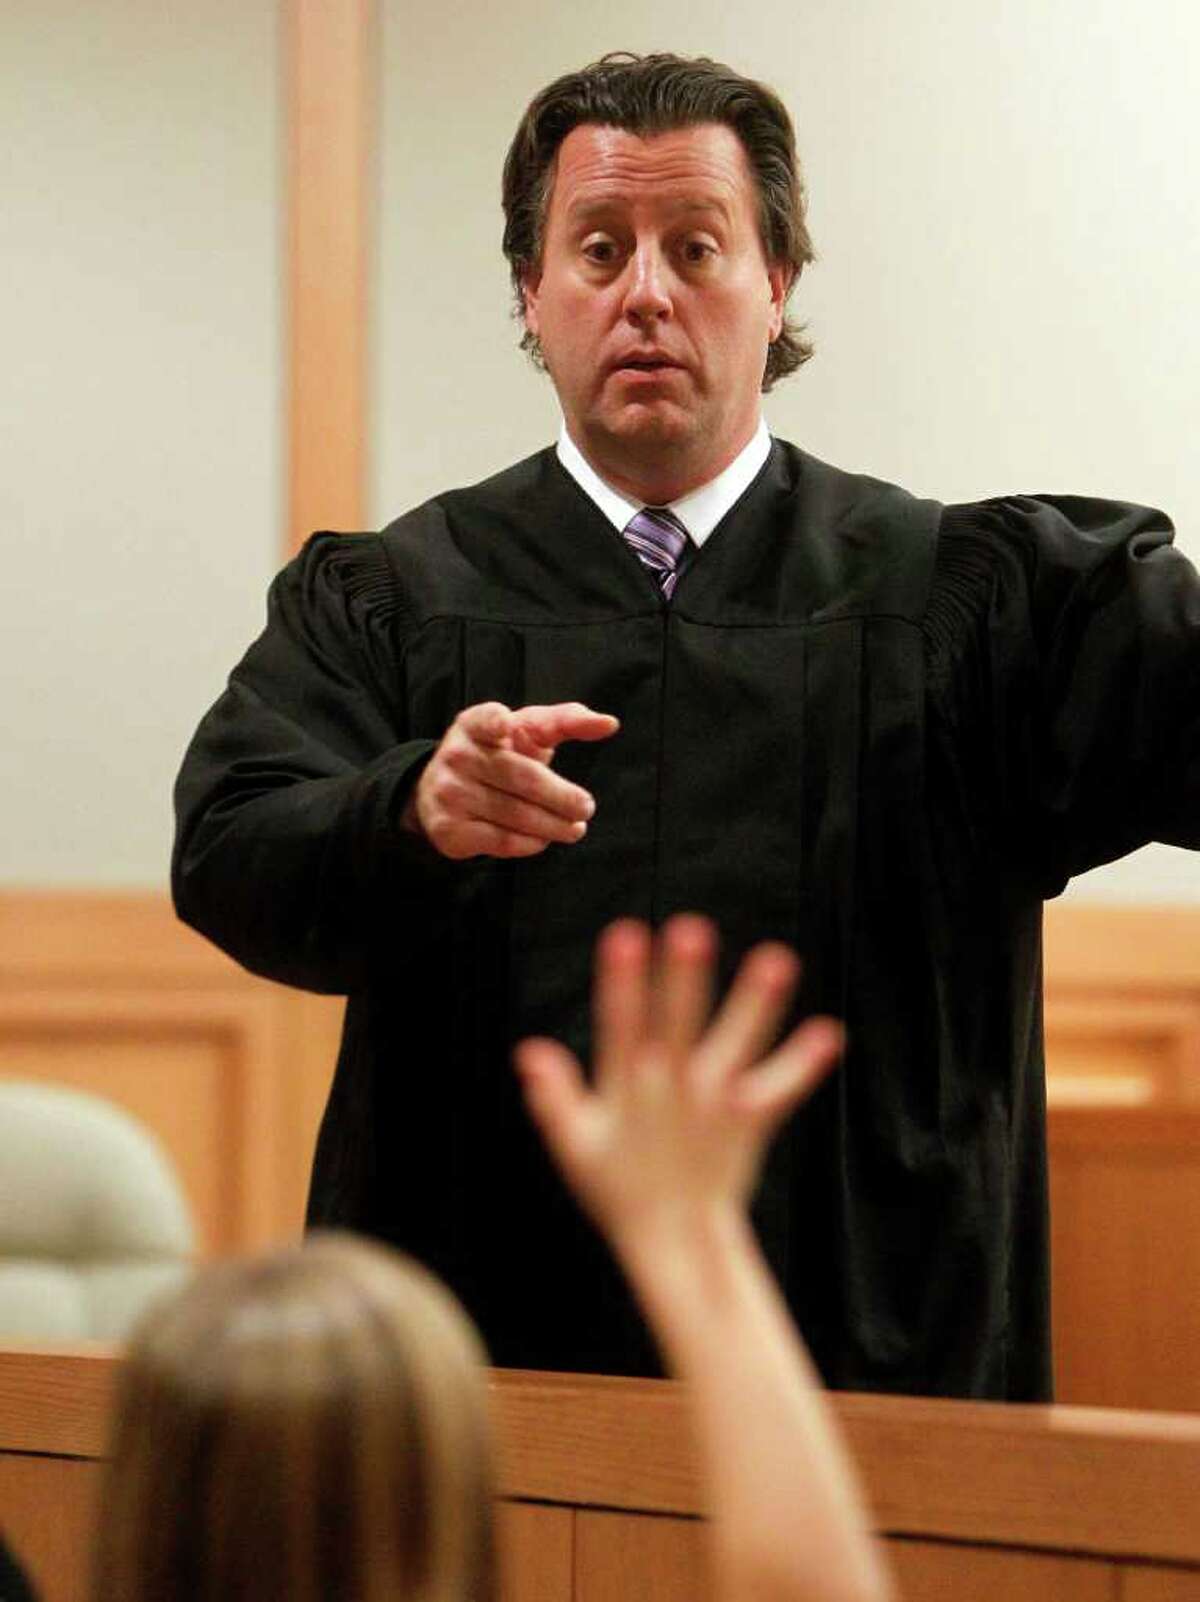 FOR USE MONDAY, JAN. 9 AND THEREAFTER - In this Dec. 15, 2011 photo, Judge Chris Oldner answers a question from a child during a mock court session at Collin County Courthouse in McKinney, Texas. The Collin County District Attorney's office and Children's Advocacy Center of Collin County have paired up to help take the fear out of testifying for children involved in felony cases. (AP Photo/The Dallas Morning News, Vernon Bryant) MANDATORY CREDIT; MAGS OUT; TV OUT; INTERNET OUT; AP MEMBERS ONLY